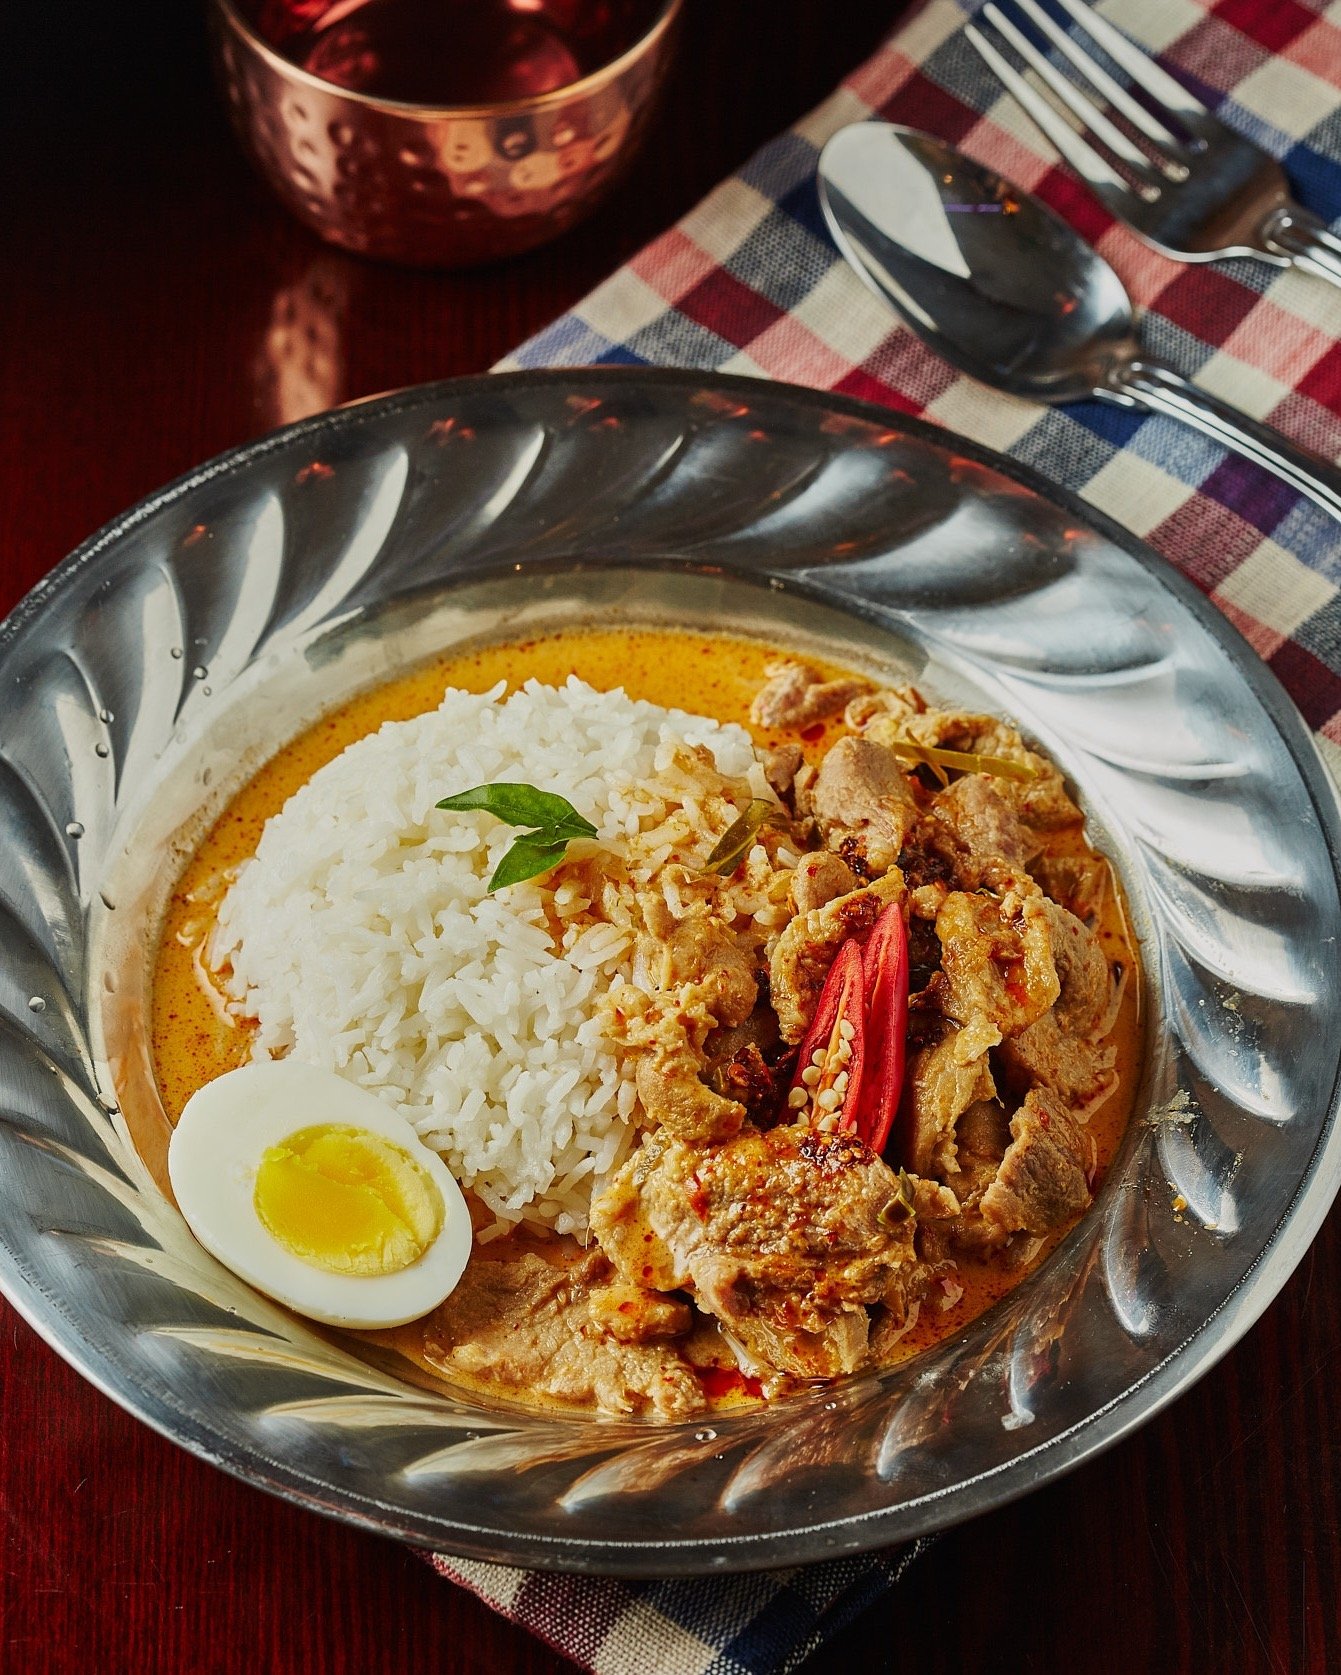 A classic dish of Panang curry combines tender protein and vegetables in a fragrant coconut curry sauce. Enjoy with Thai Hom Mal Mali Rice, a long-grained rice that has floral notes and is often served with seafood and curry. #LoveThaiFoodEatThaiRice